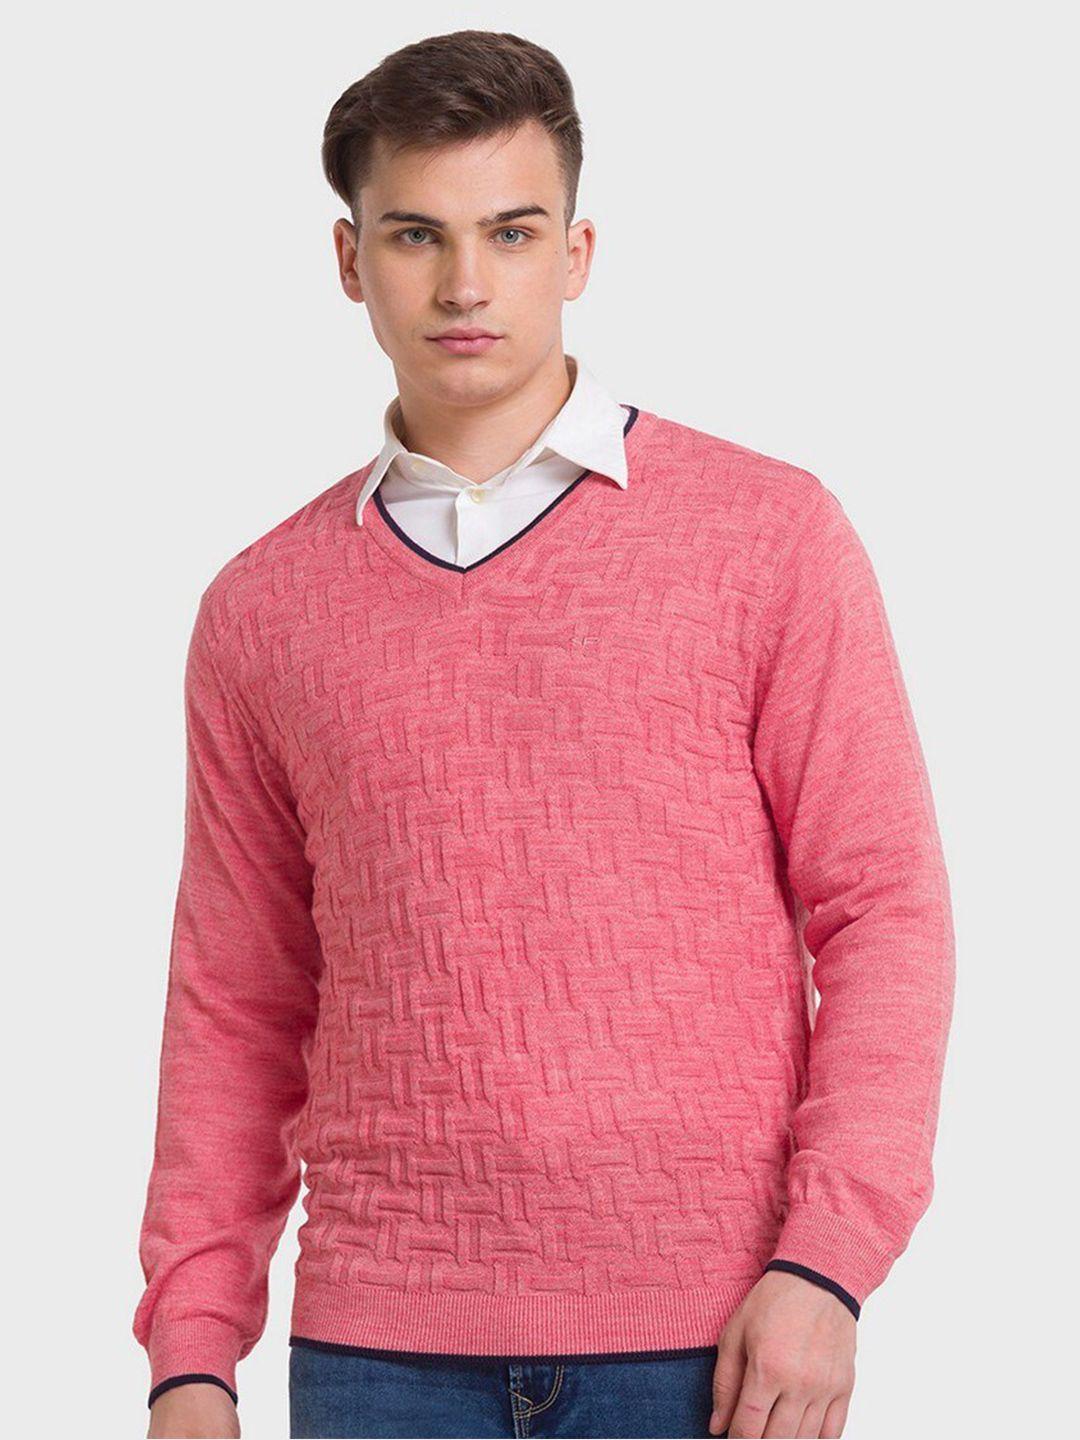 colorplus-men-red-ribbed-pullover